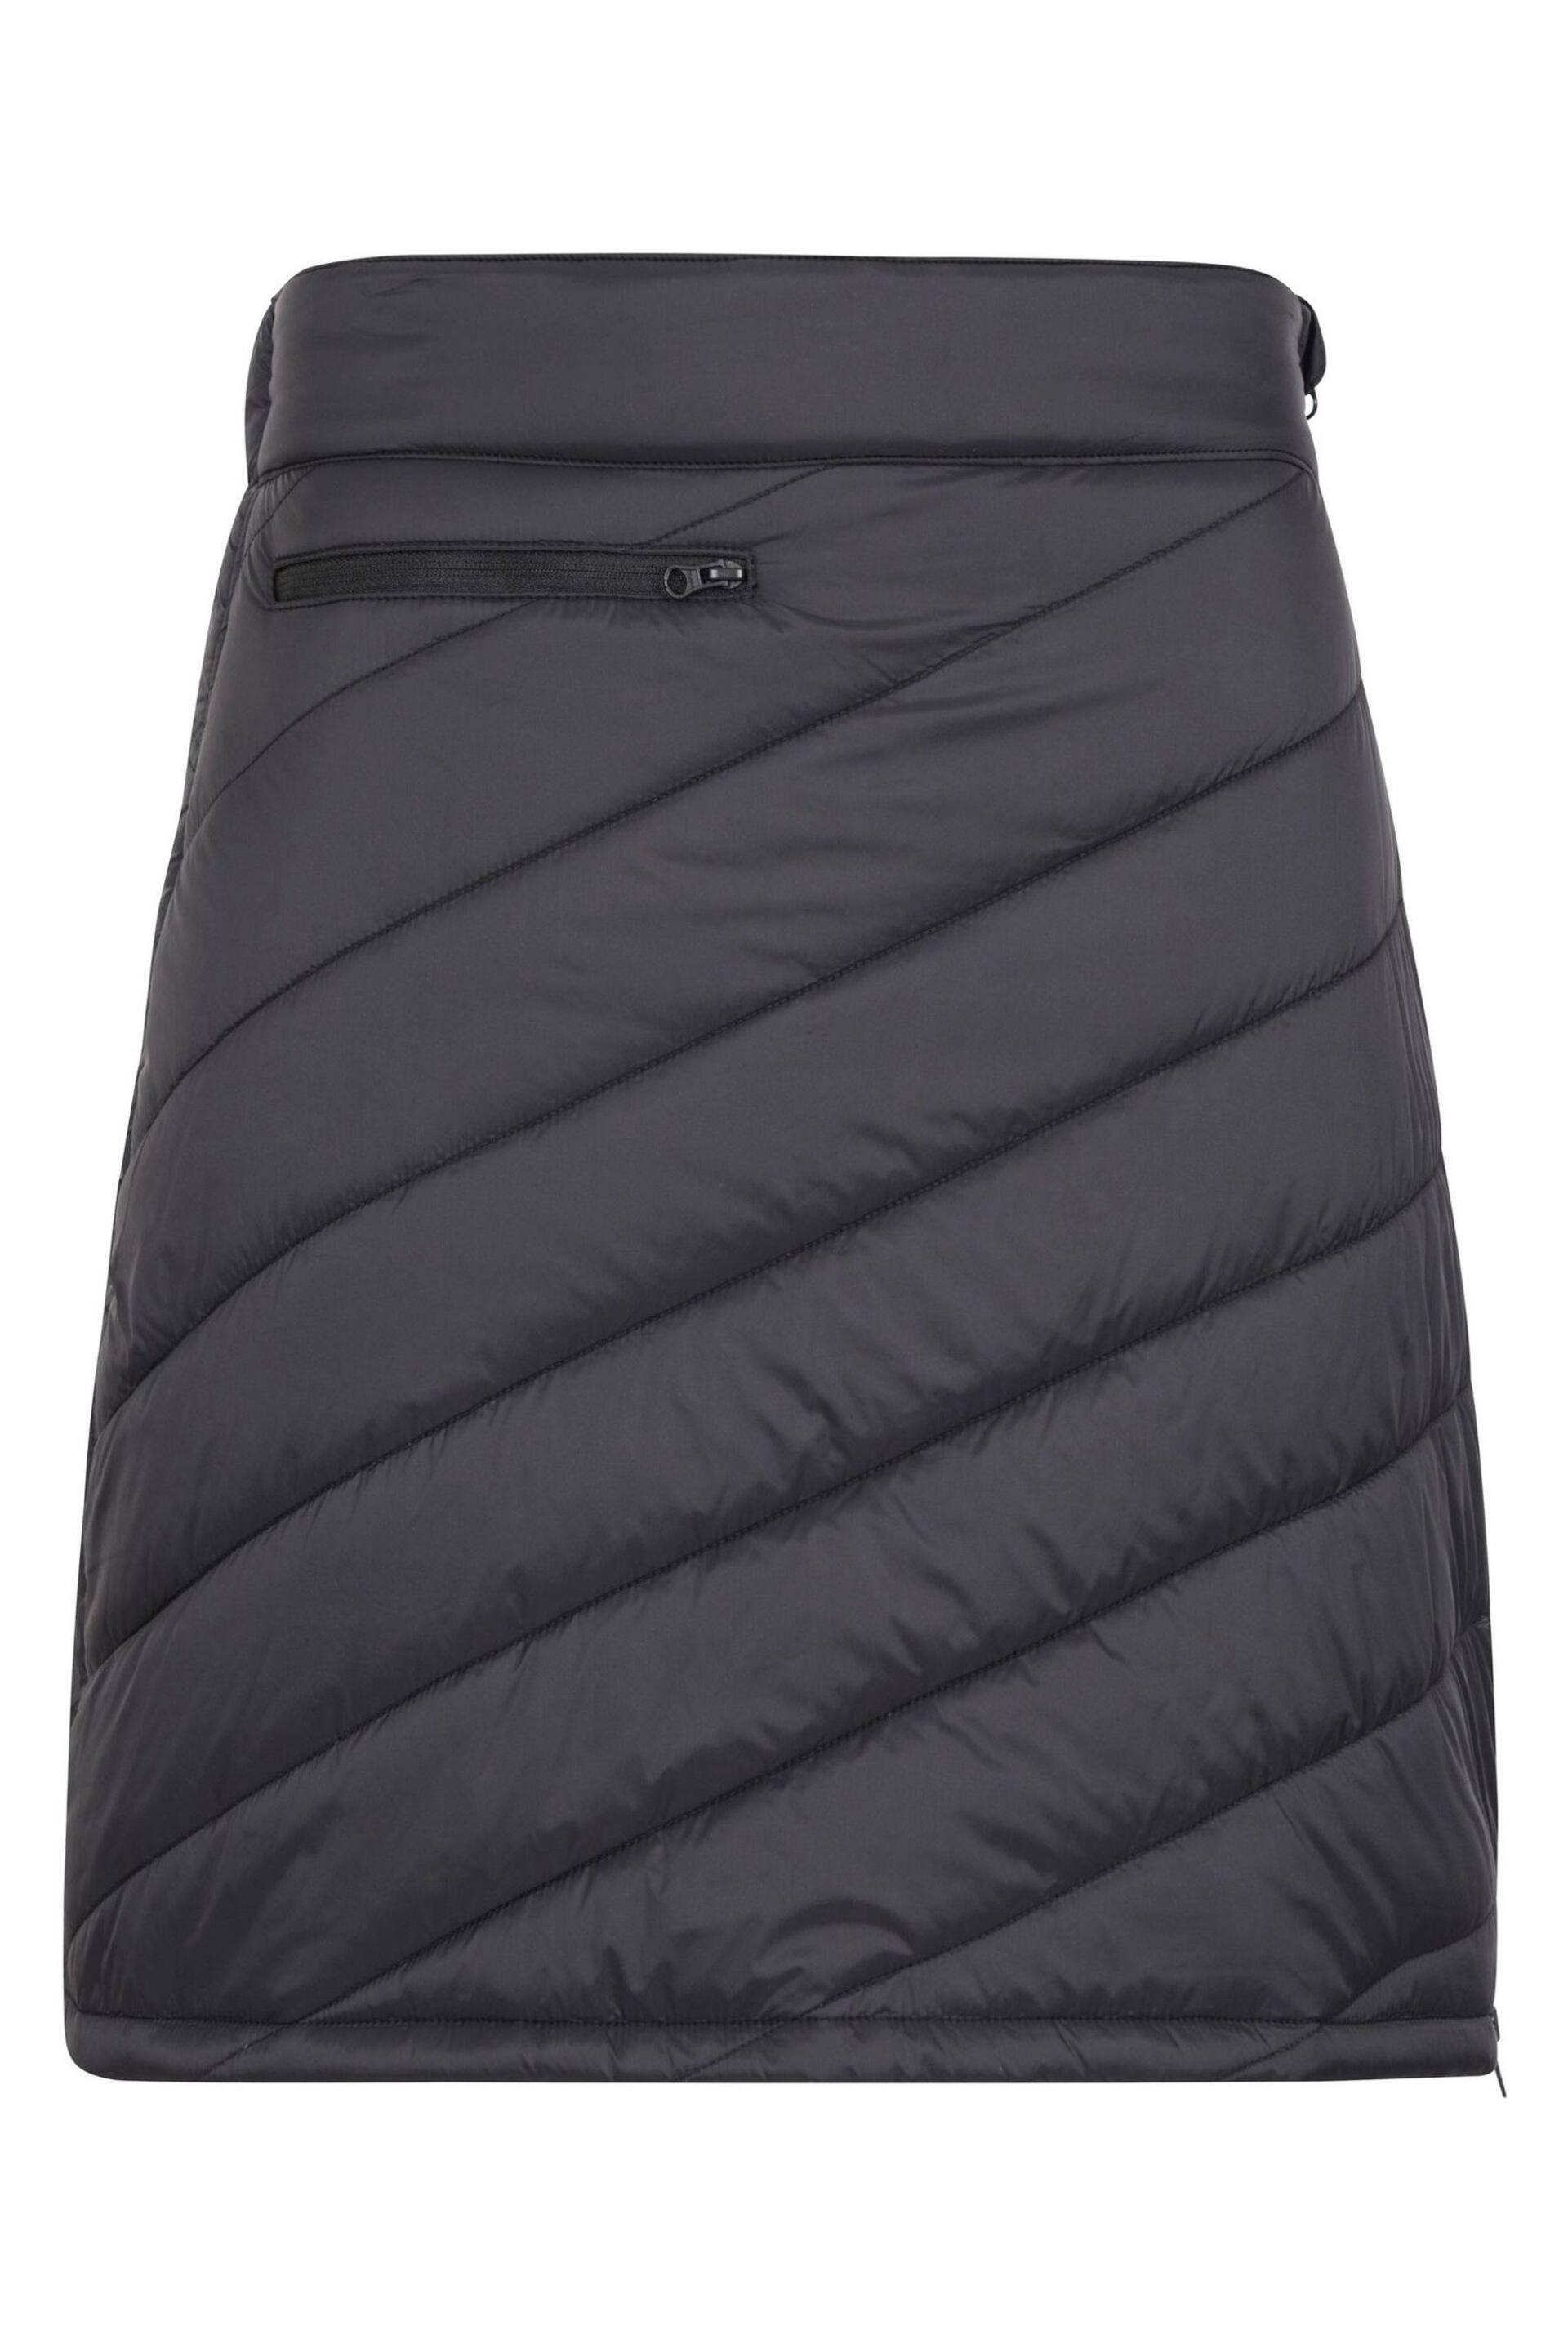 Mountain Warehouse Black Water Resistant Womens Padded Skirt - Image 5 of 5